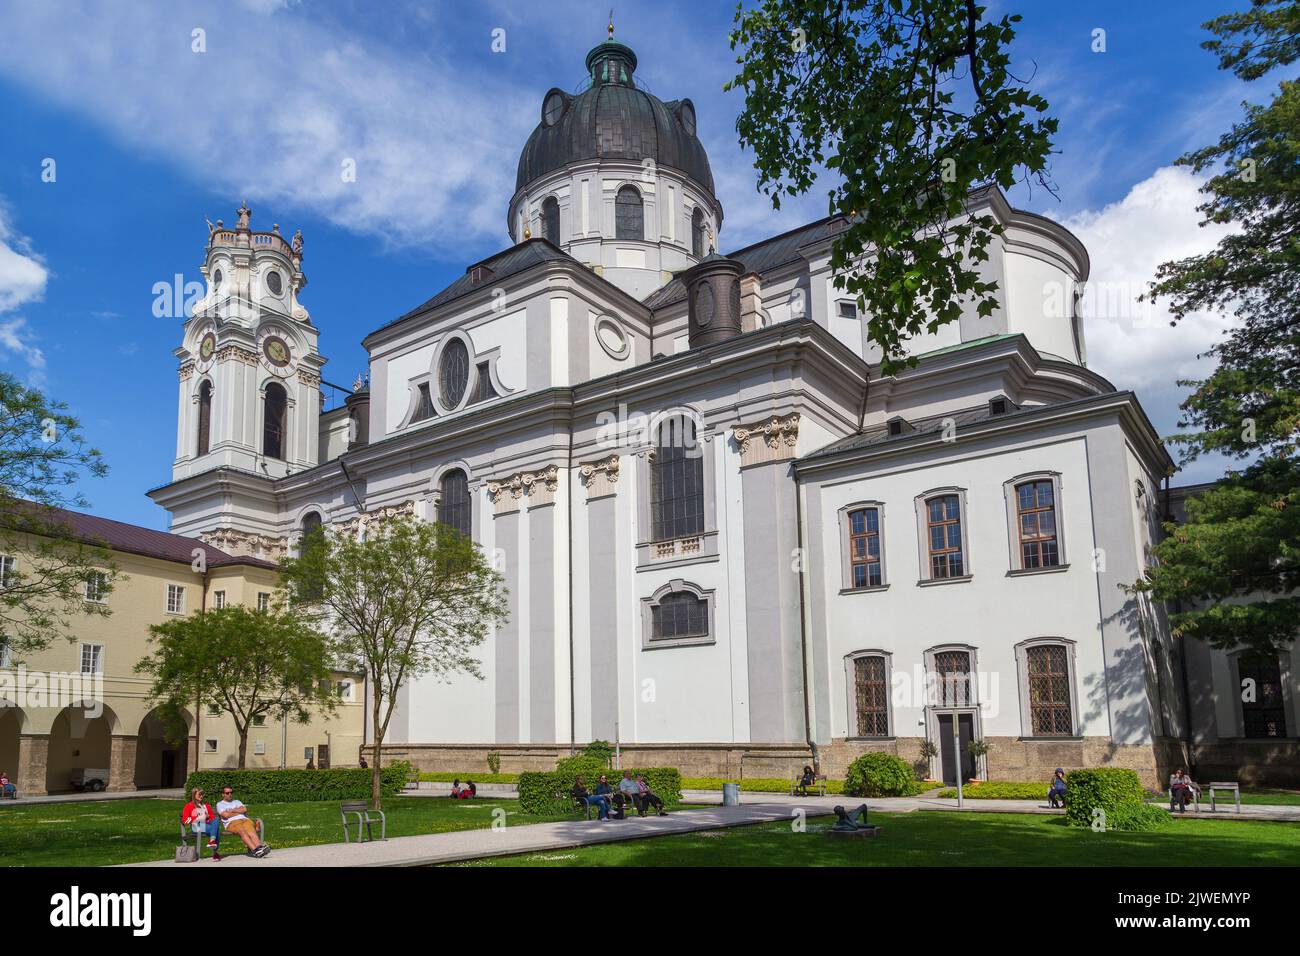 SALZBURG, AUSTRIA - MAY 17, 2019: This is a view of the Collegiate University Church from Furtwengler Park. Stock Photo